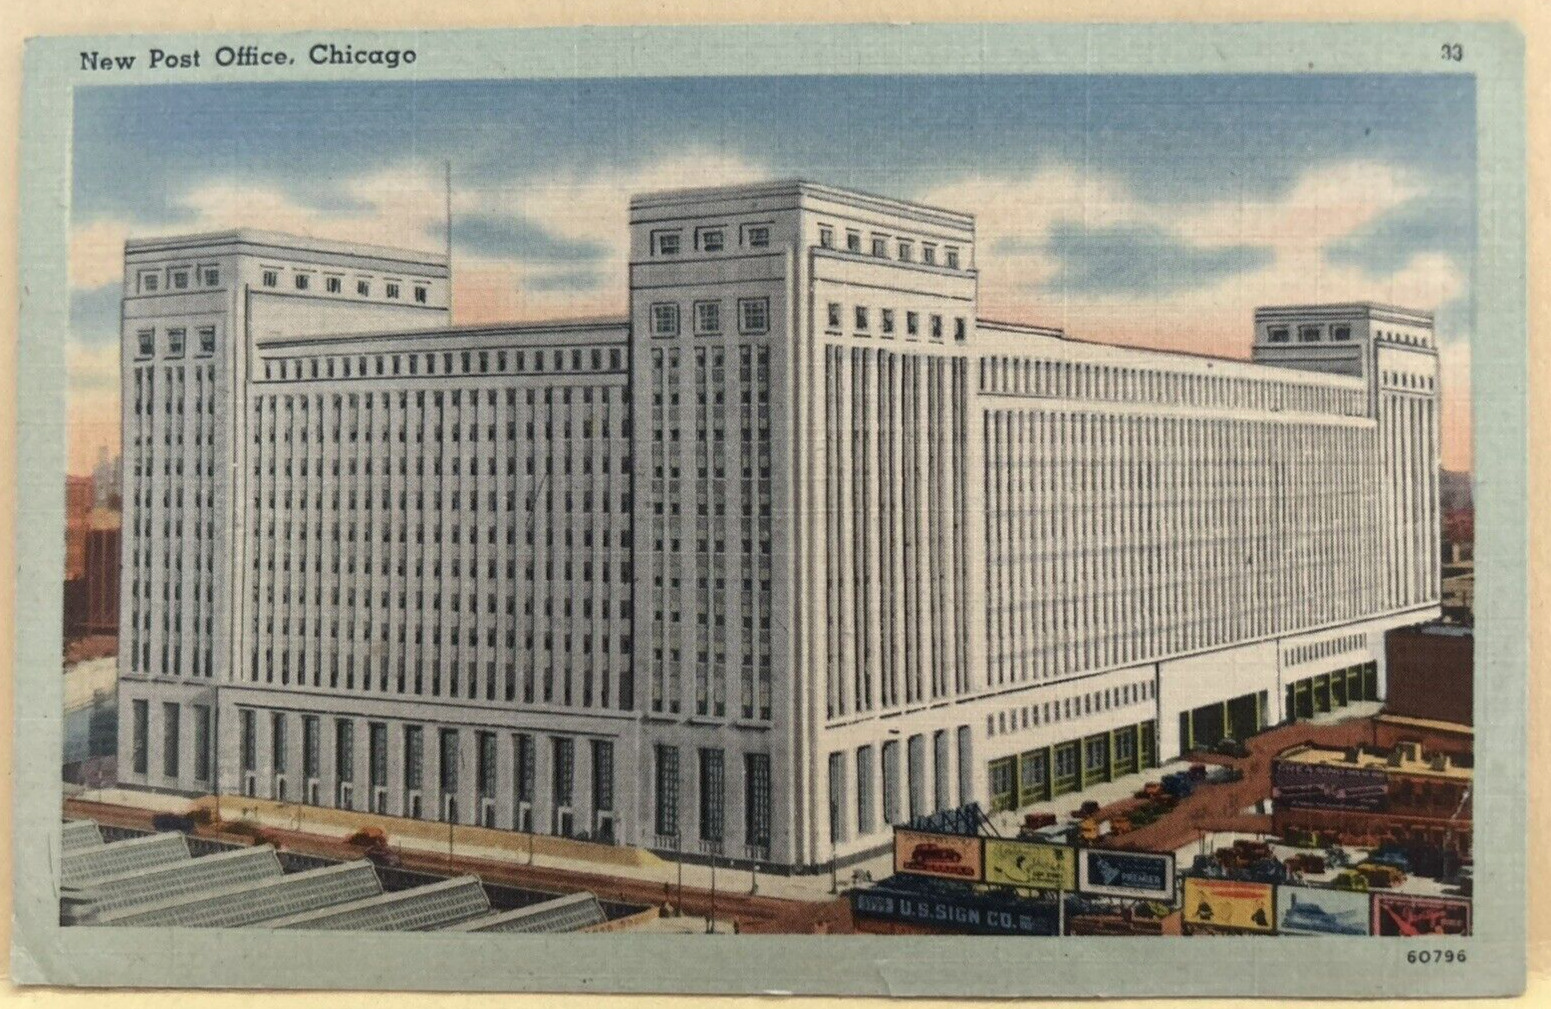 New Post Office Building Chicago Illinois c1947 Linen Postcard - a8